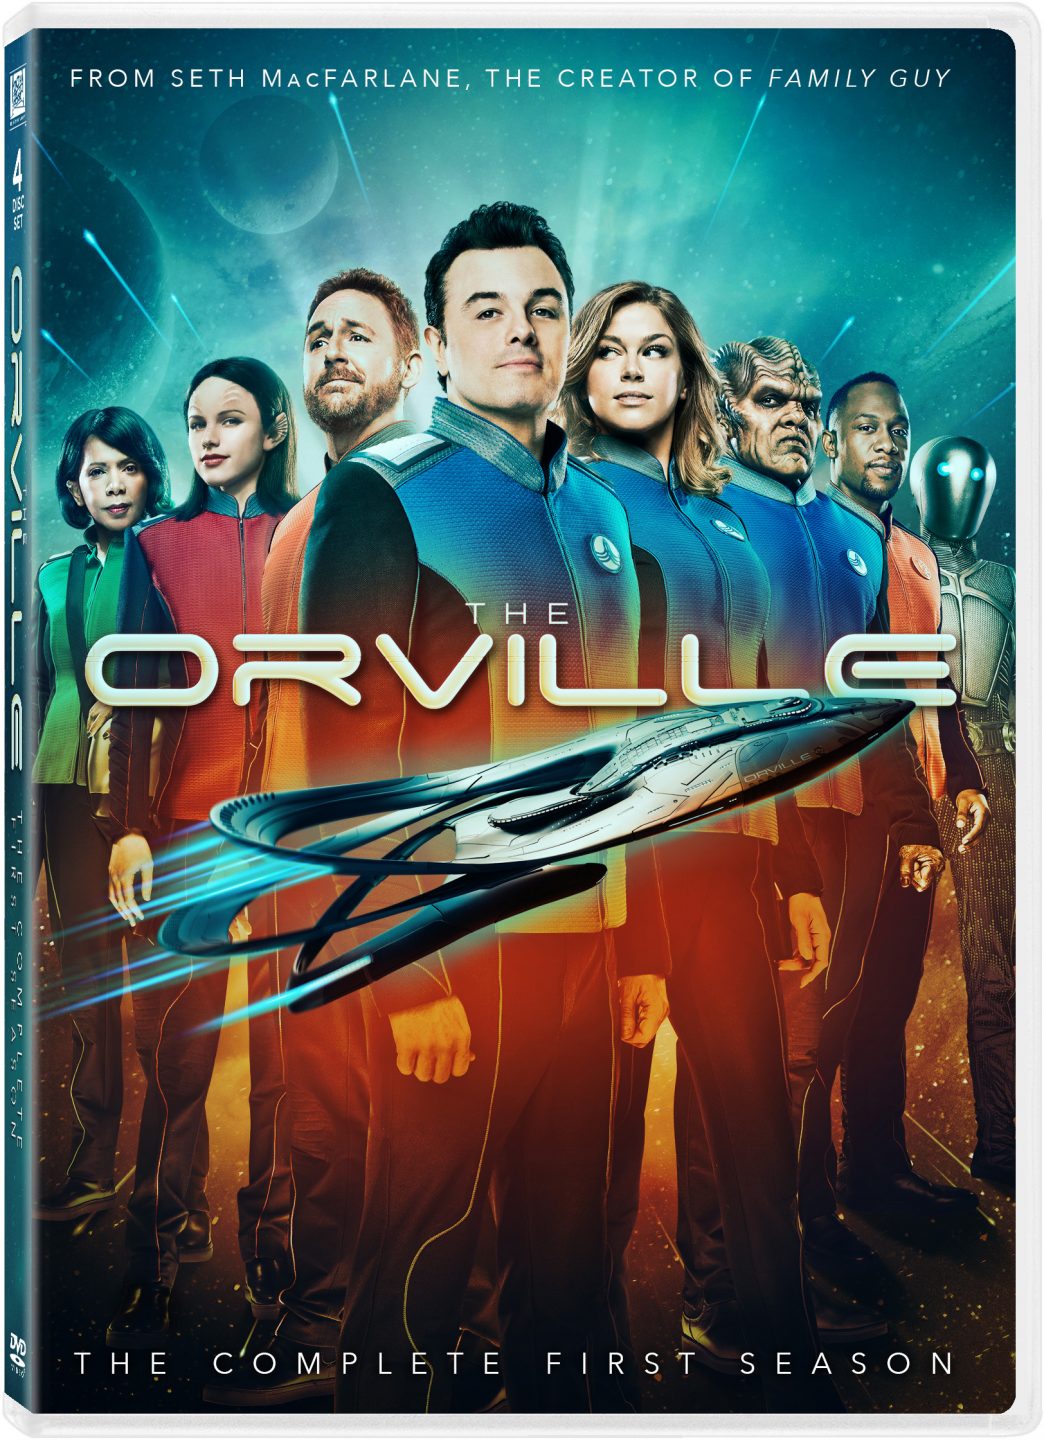 The Orville The Complete First Season DVD cover (20th Century Fox Home Entertainment)